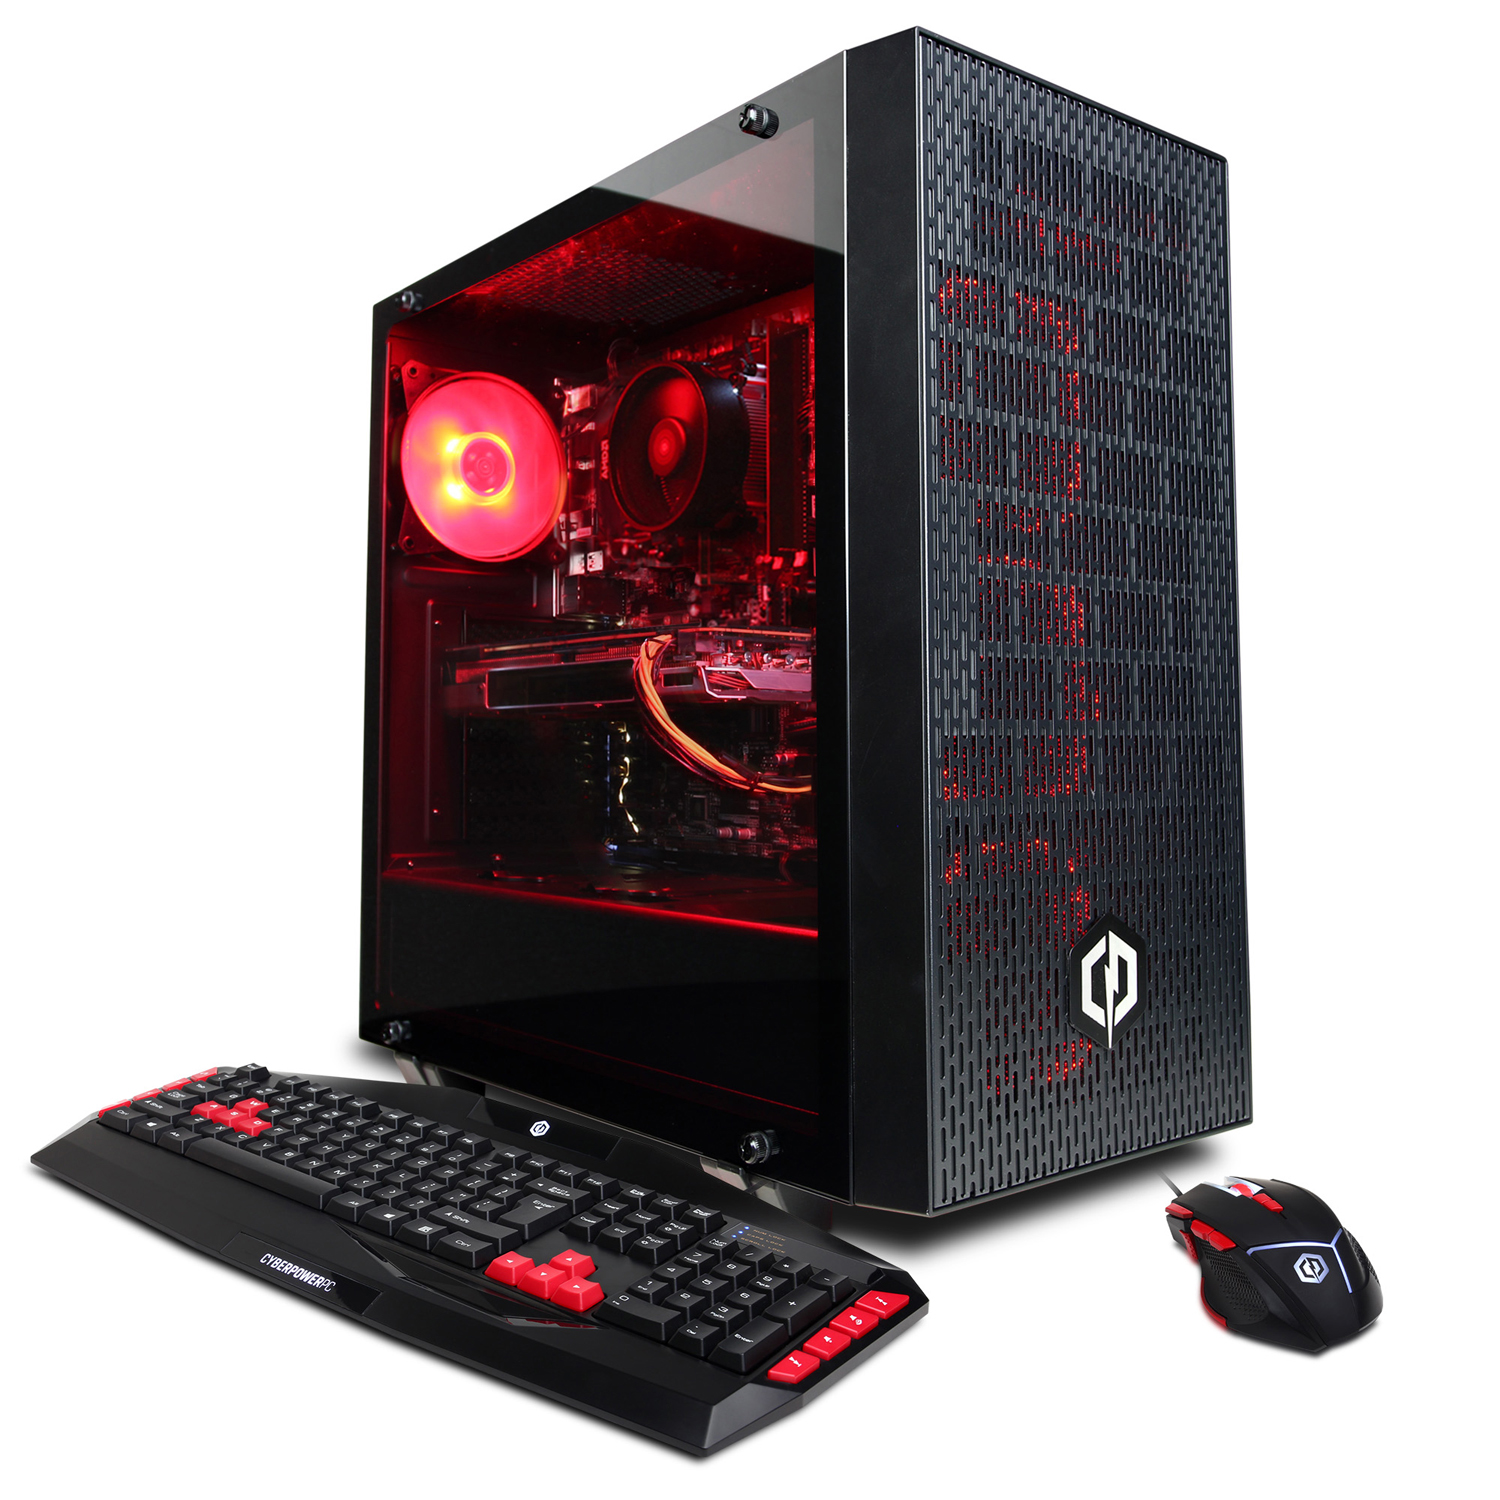 CYBERPOWERPC Gamer Master GMA6400CPG w/ AMD Ryzen 7 2700X Processor, NVIDIA GeForce GTX 1070 Ti Graphics, 16GB Memory, 240GB SSD, 2TB Hard Drive and Windows 10 Home (Monitor Not Included) - image 1 of 56